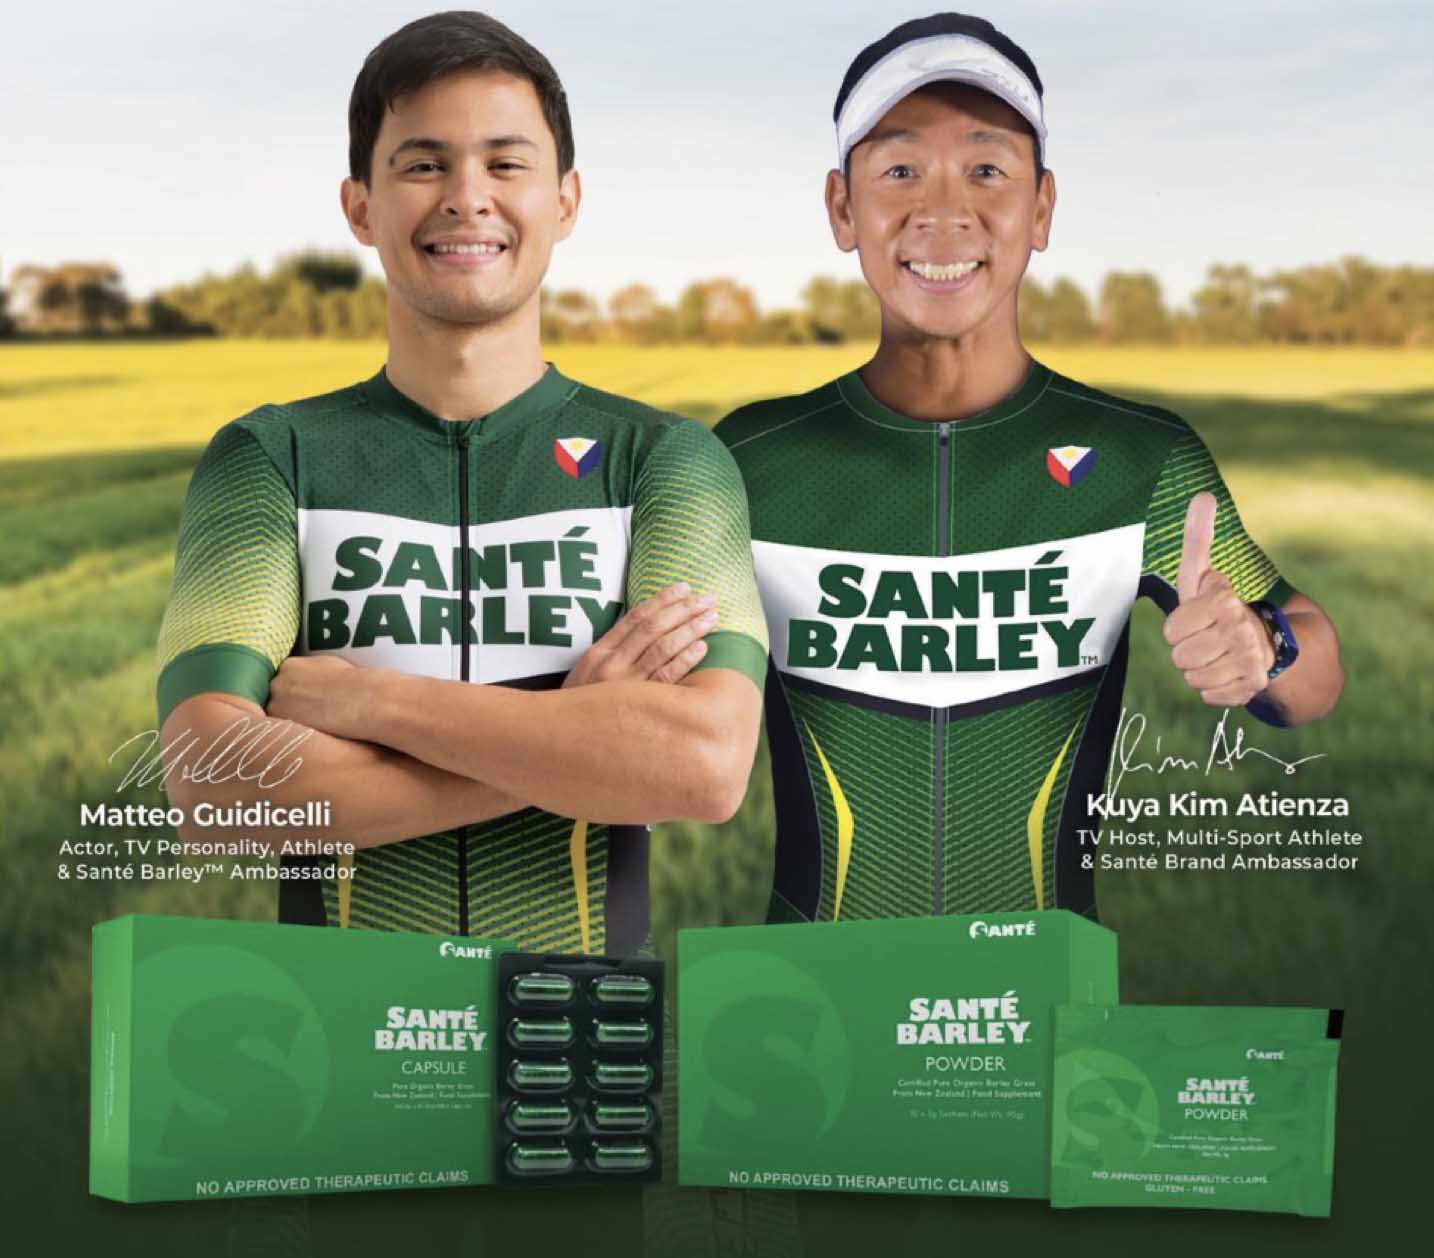 What’s the Best Shade of Green? Kuya Kim, Matteo Guidicelli say it’s leading a Healthy Life